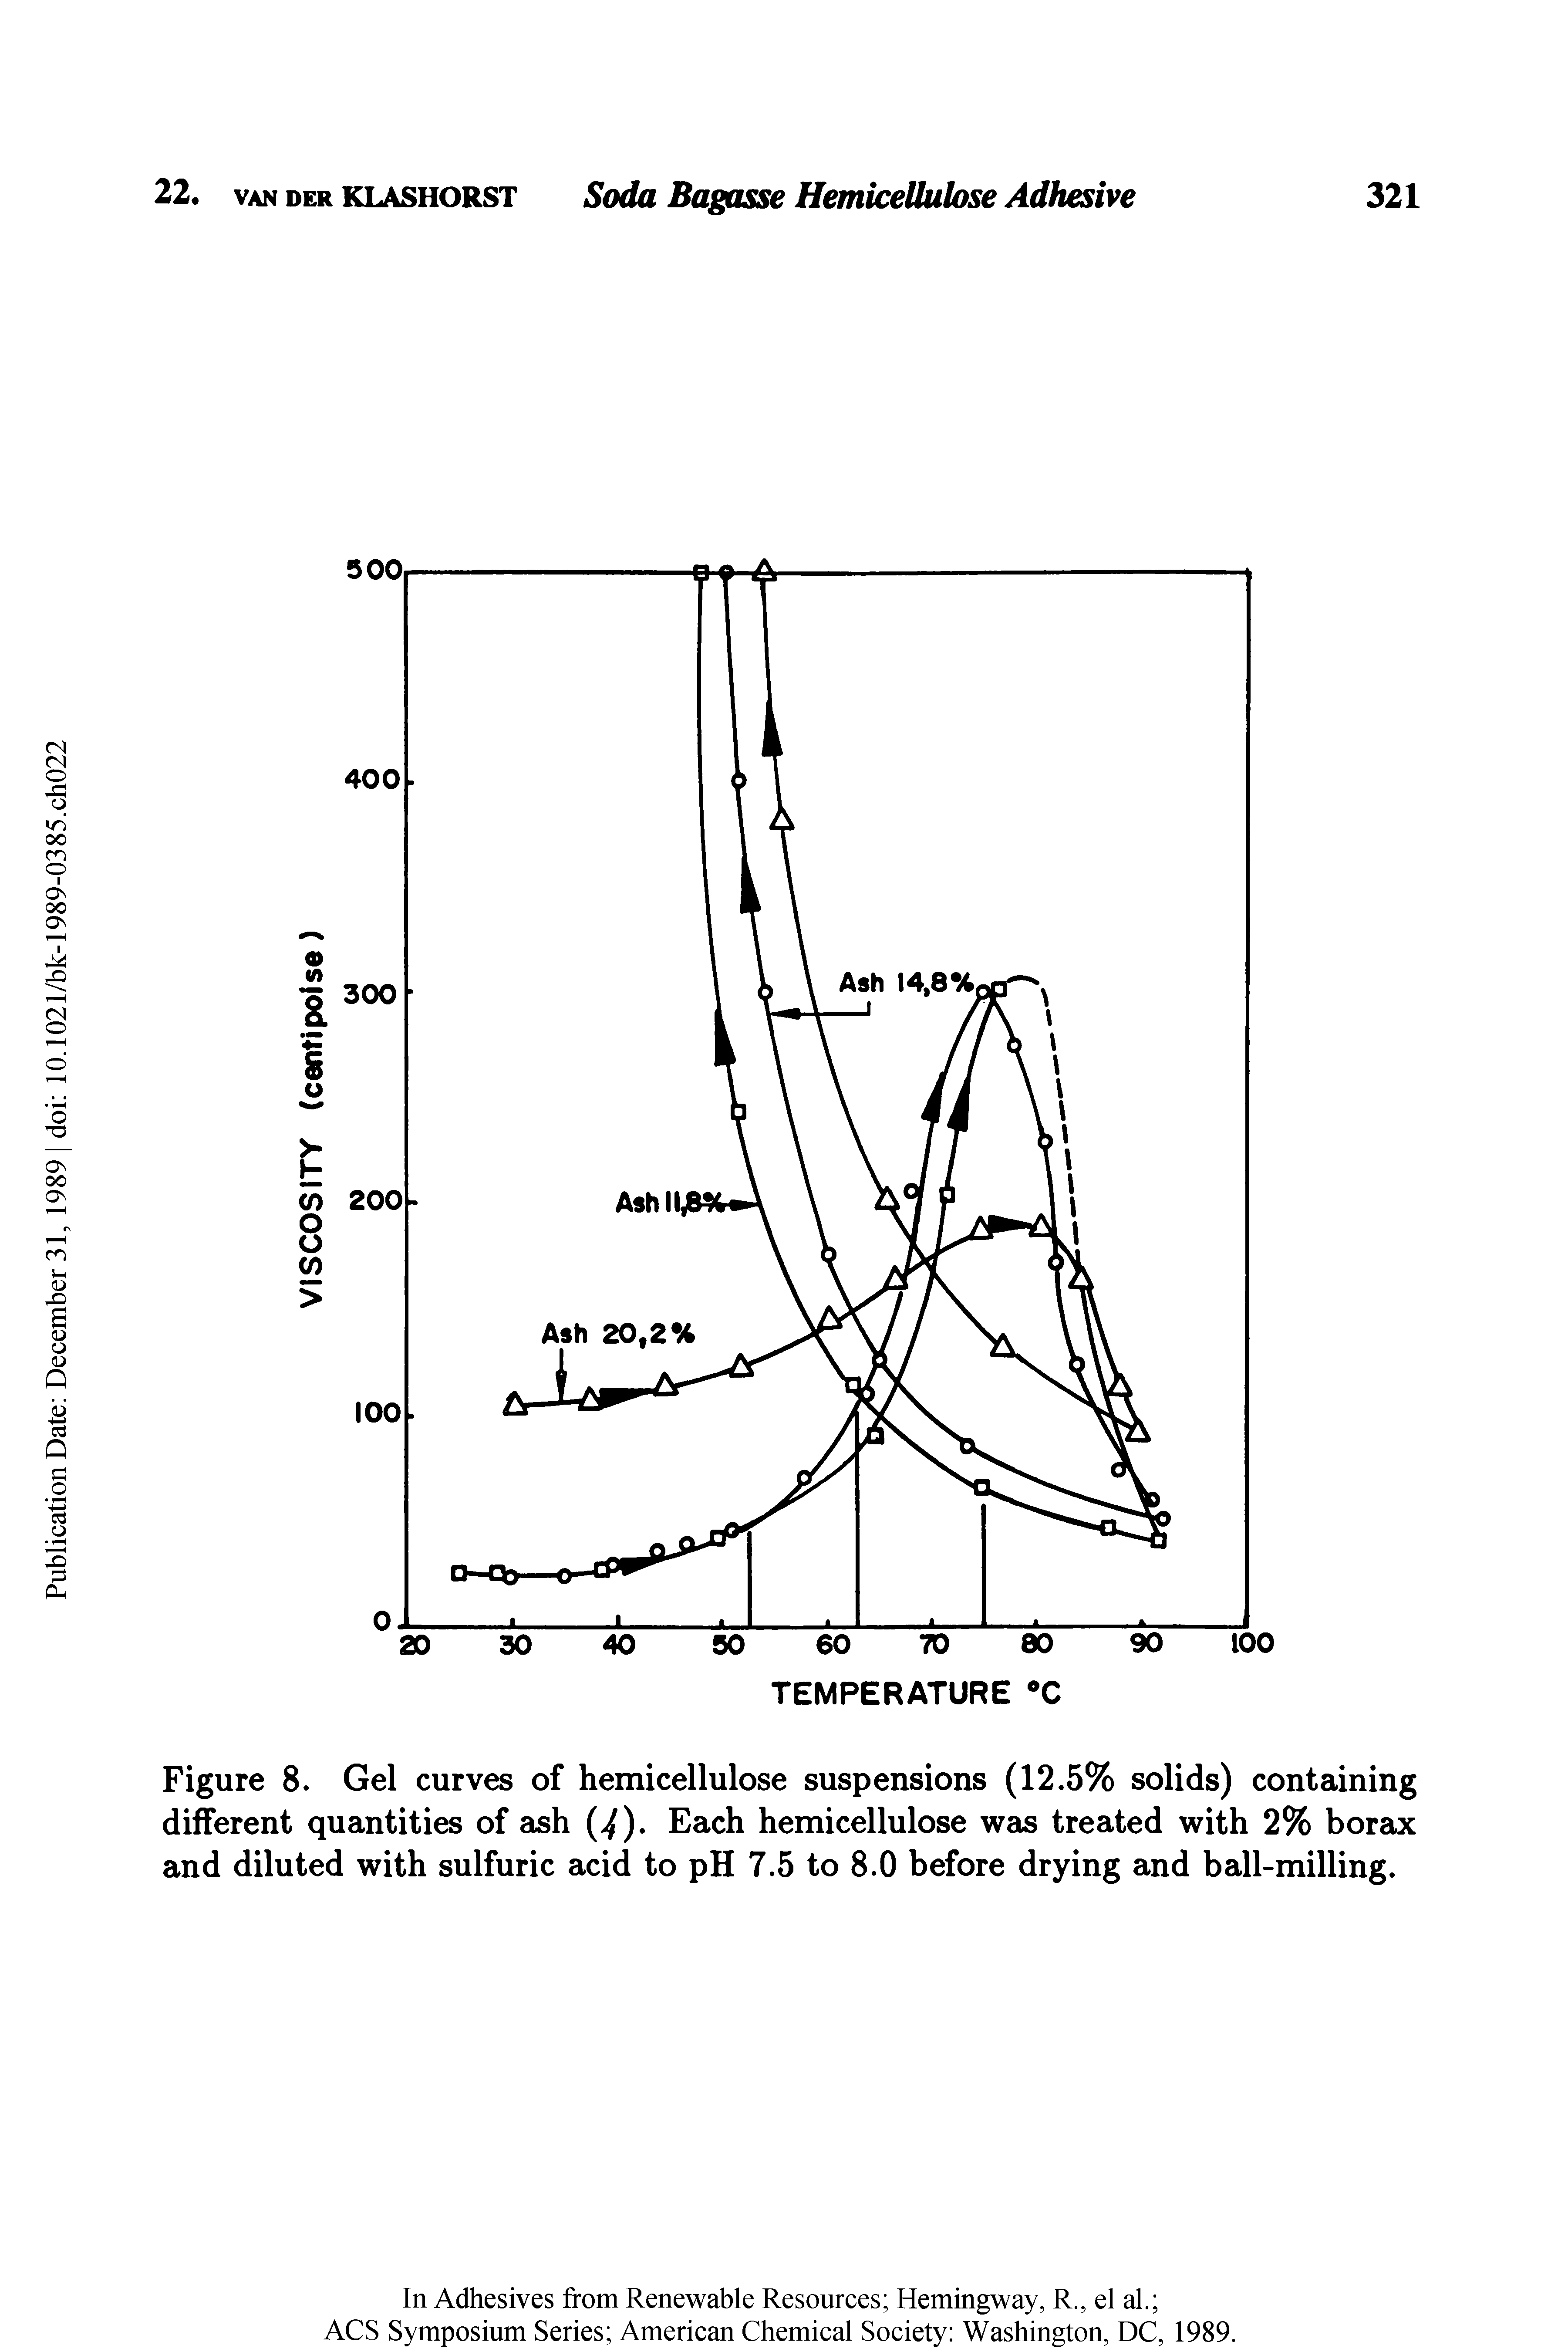 Figure 8. Gel curves of hemicellulose suspensions (12.5% solids) containing different quantities of ash (>/). Each hemicellulose was treated with 2% borax and diluted with sulfuric acid to pH 7.5 to 8.0 before drying and ball-milling.